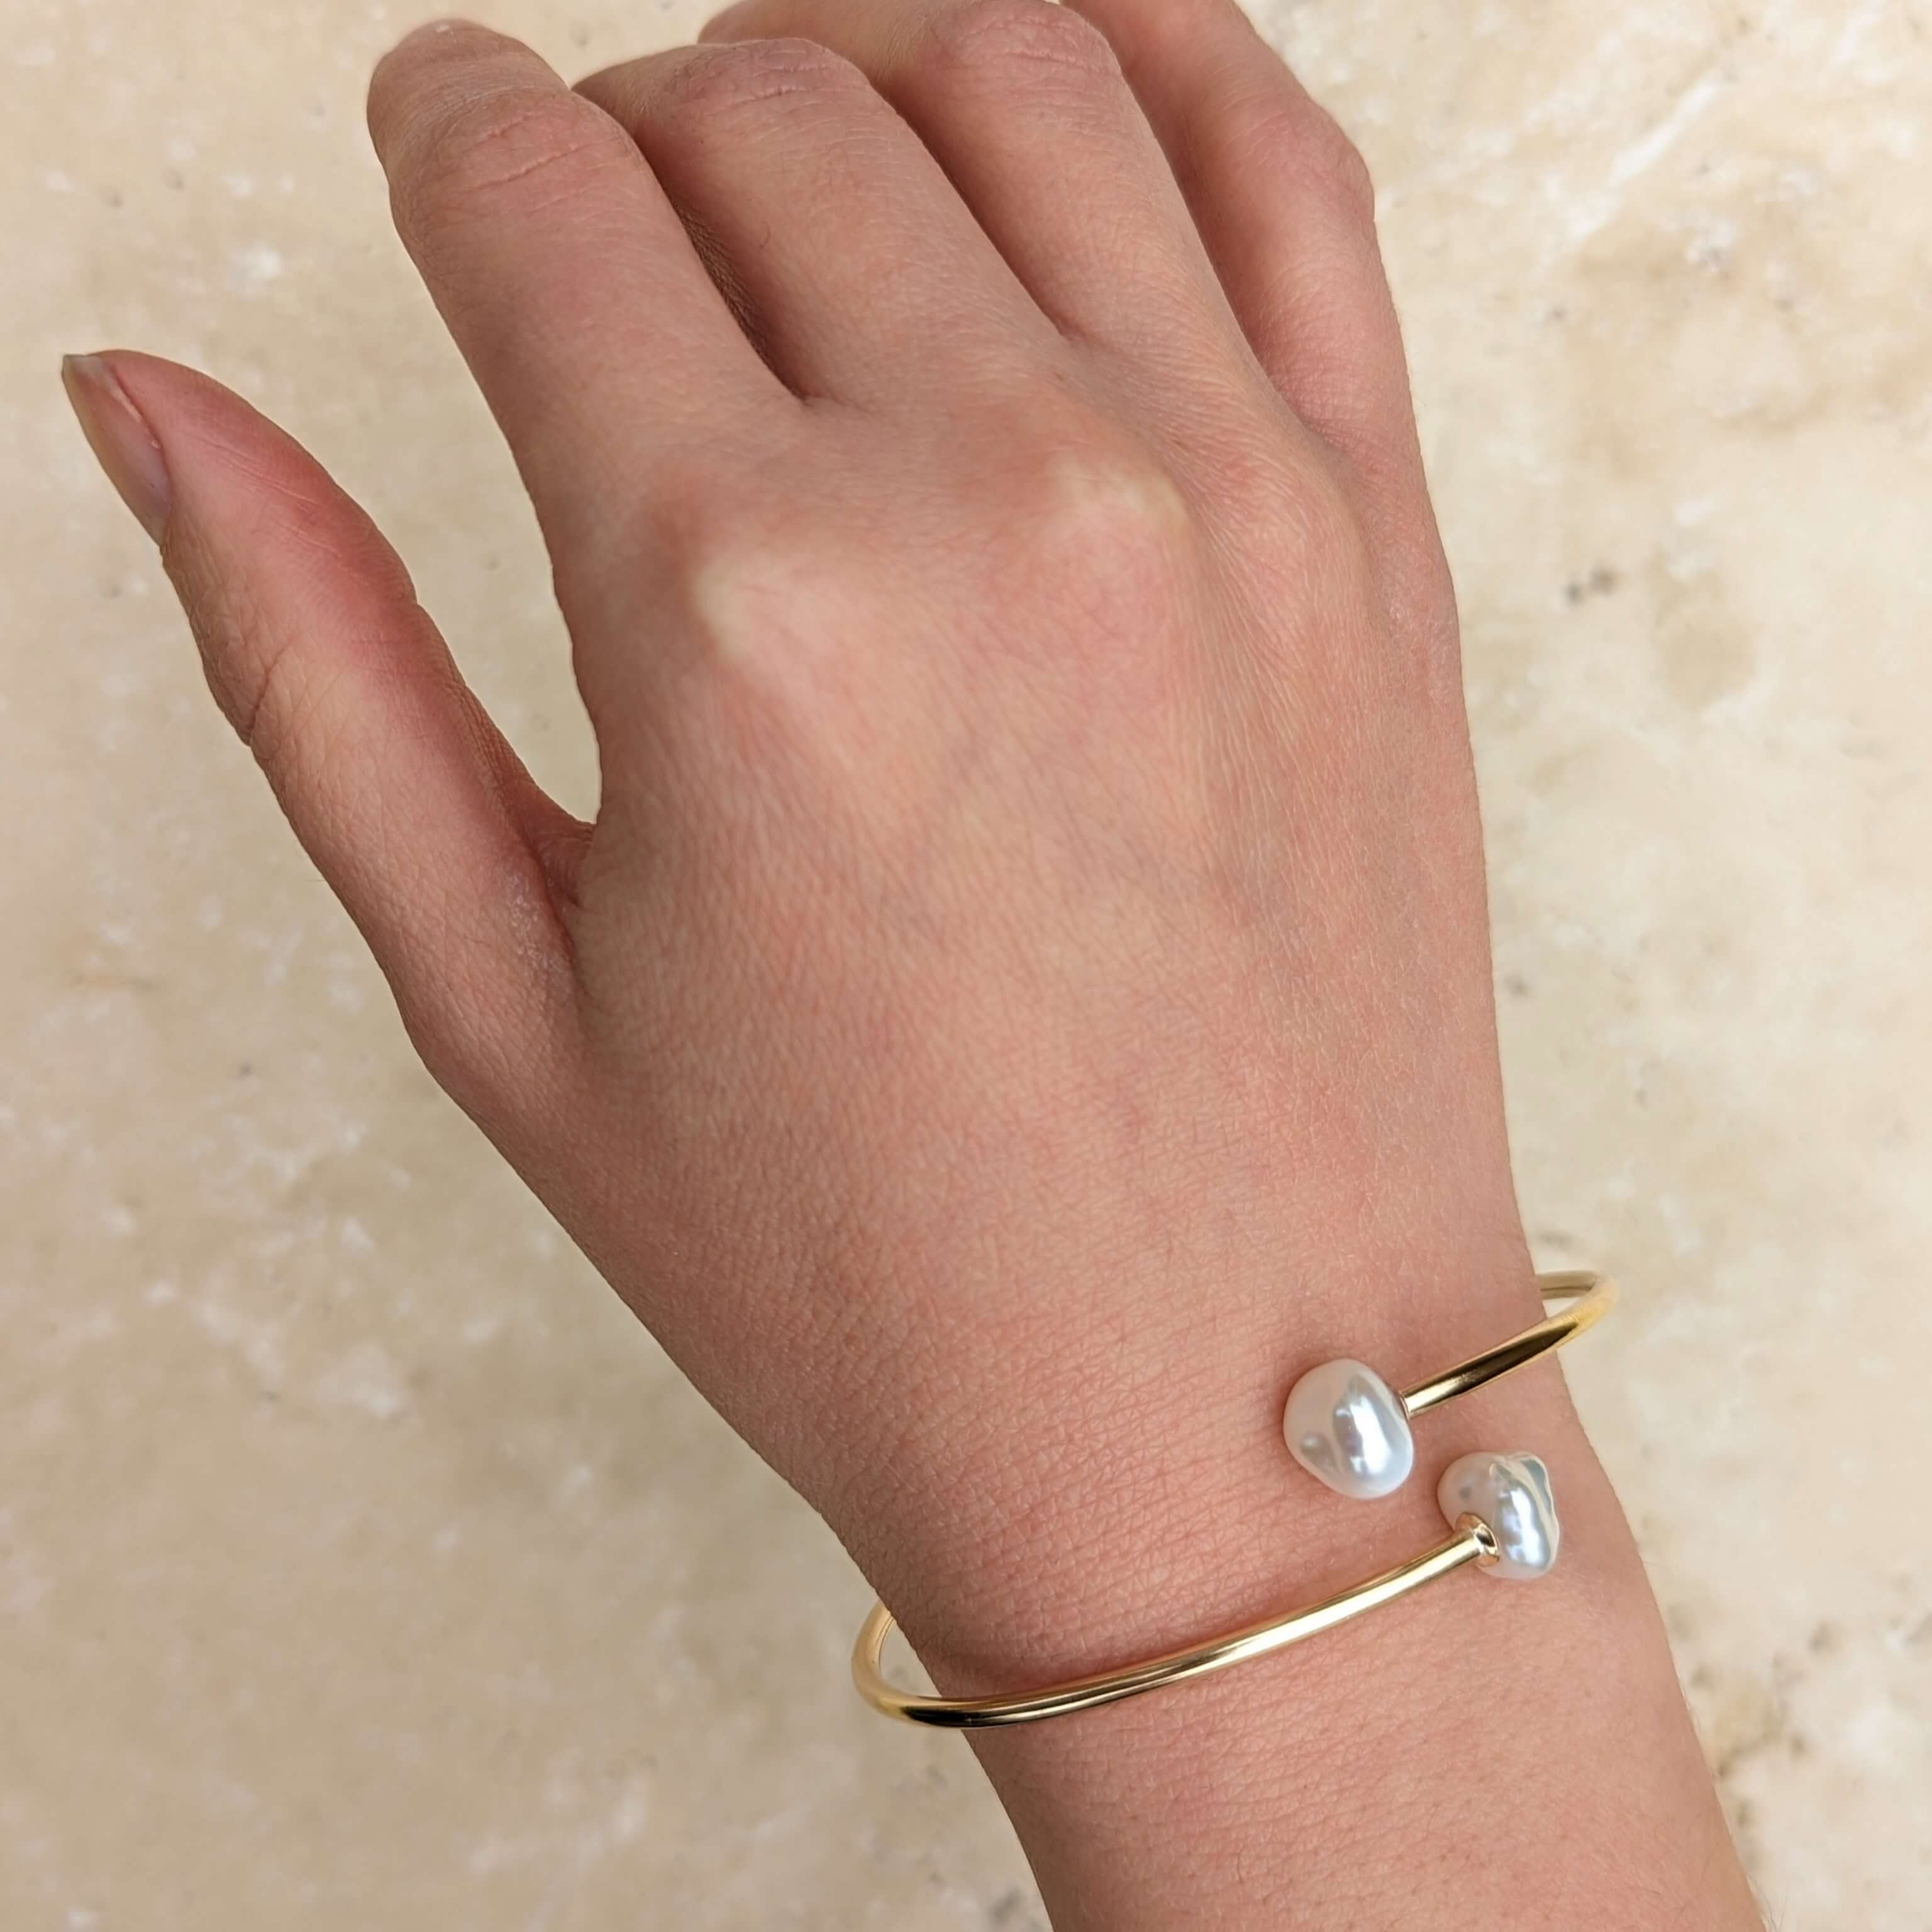 Wrist wearing flexible pearl bypass bangle in gold